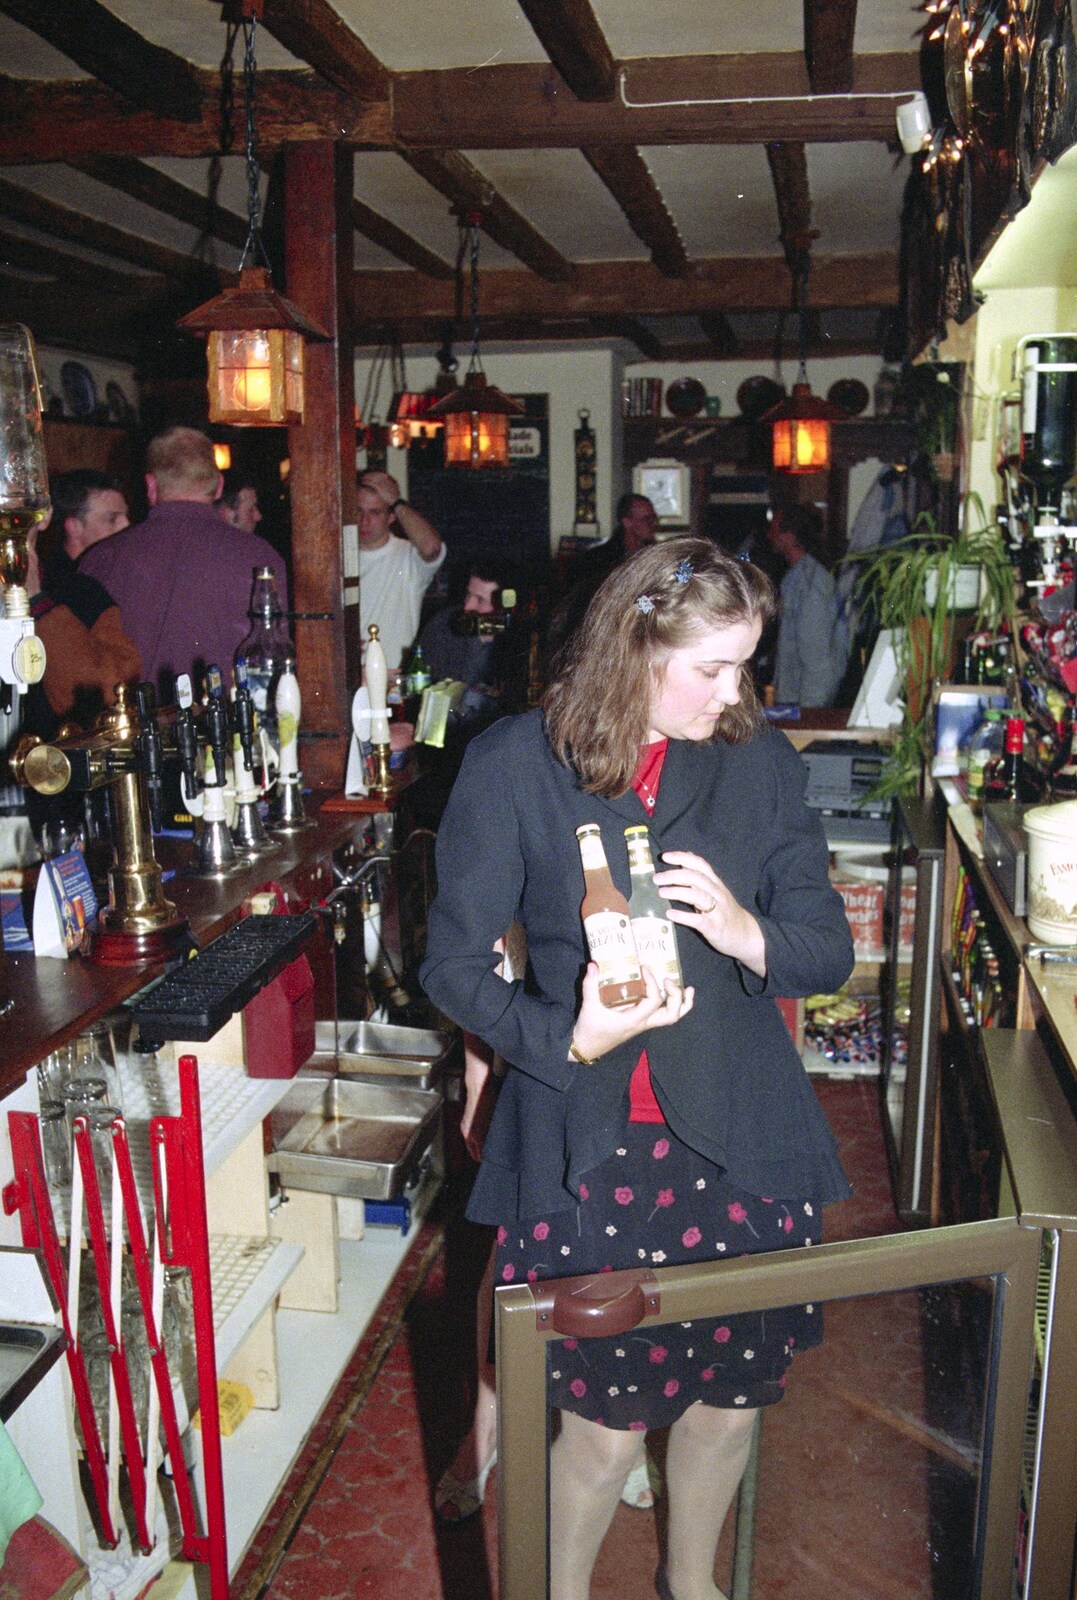 Claire gets some J2Os out of the fridge from Wavy's Thirtieth Birthday, The Swan Inn, Brome, Suffolk - 24th May 2000